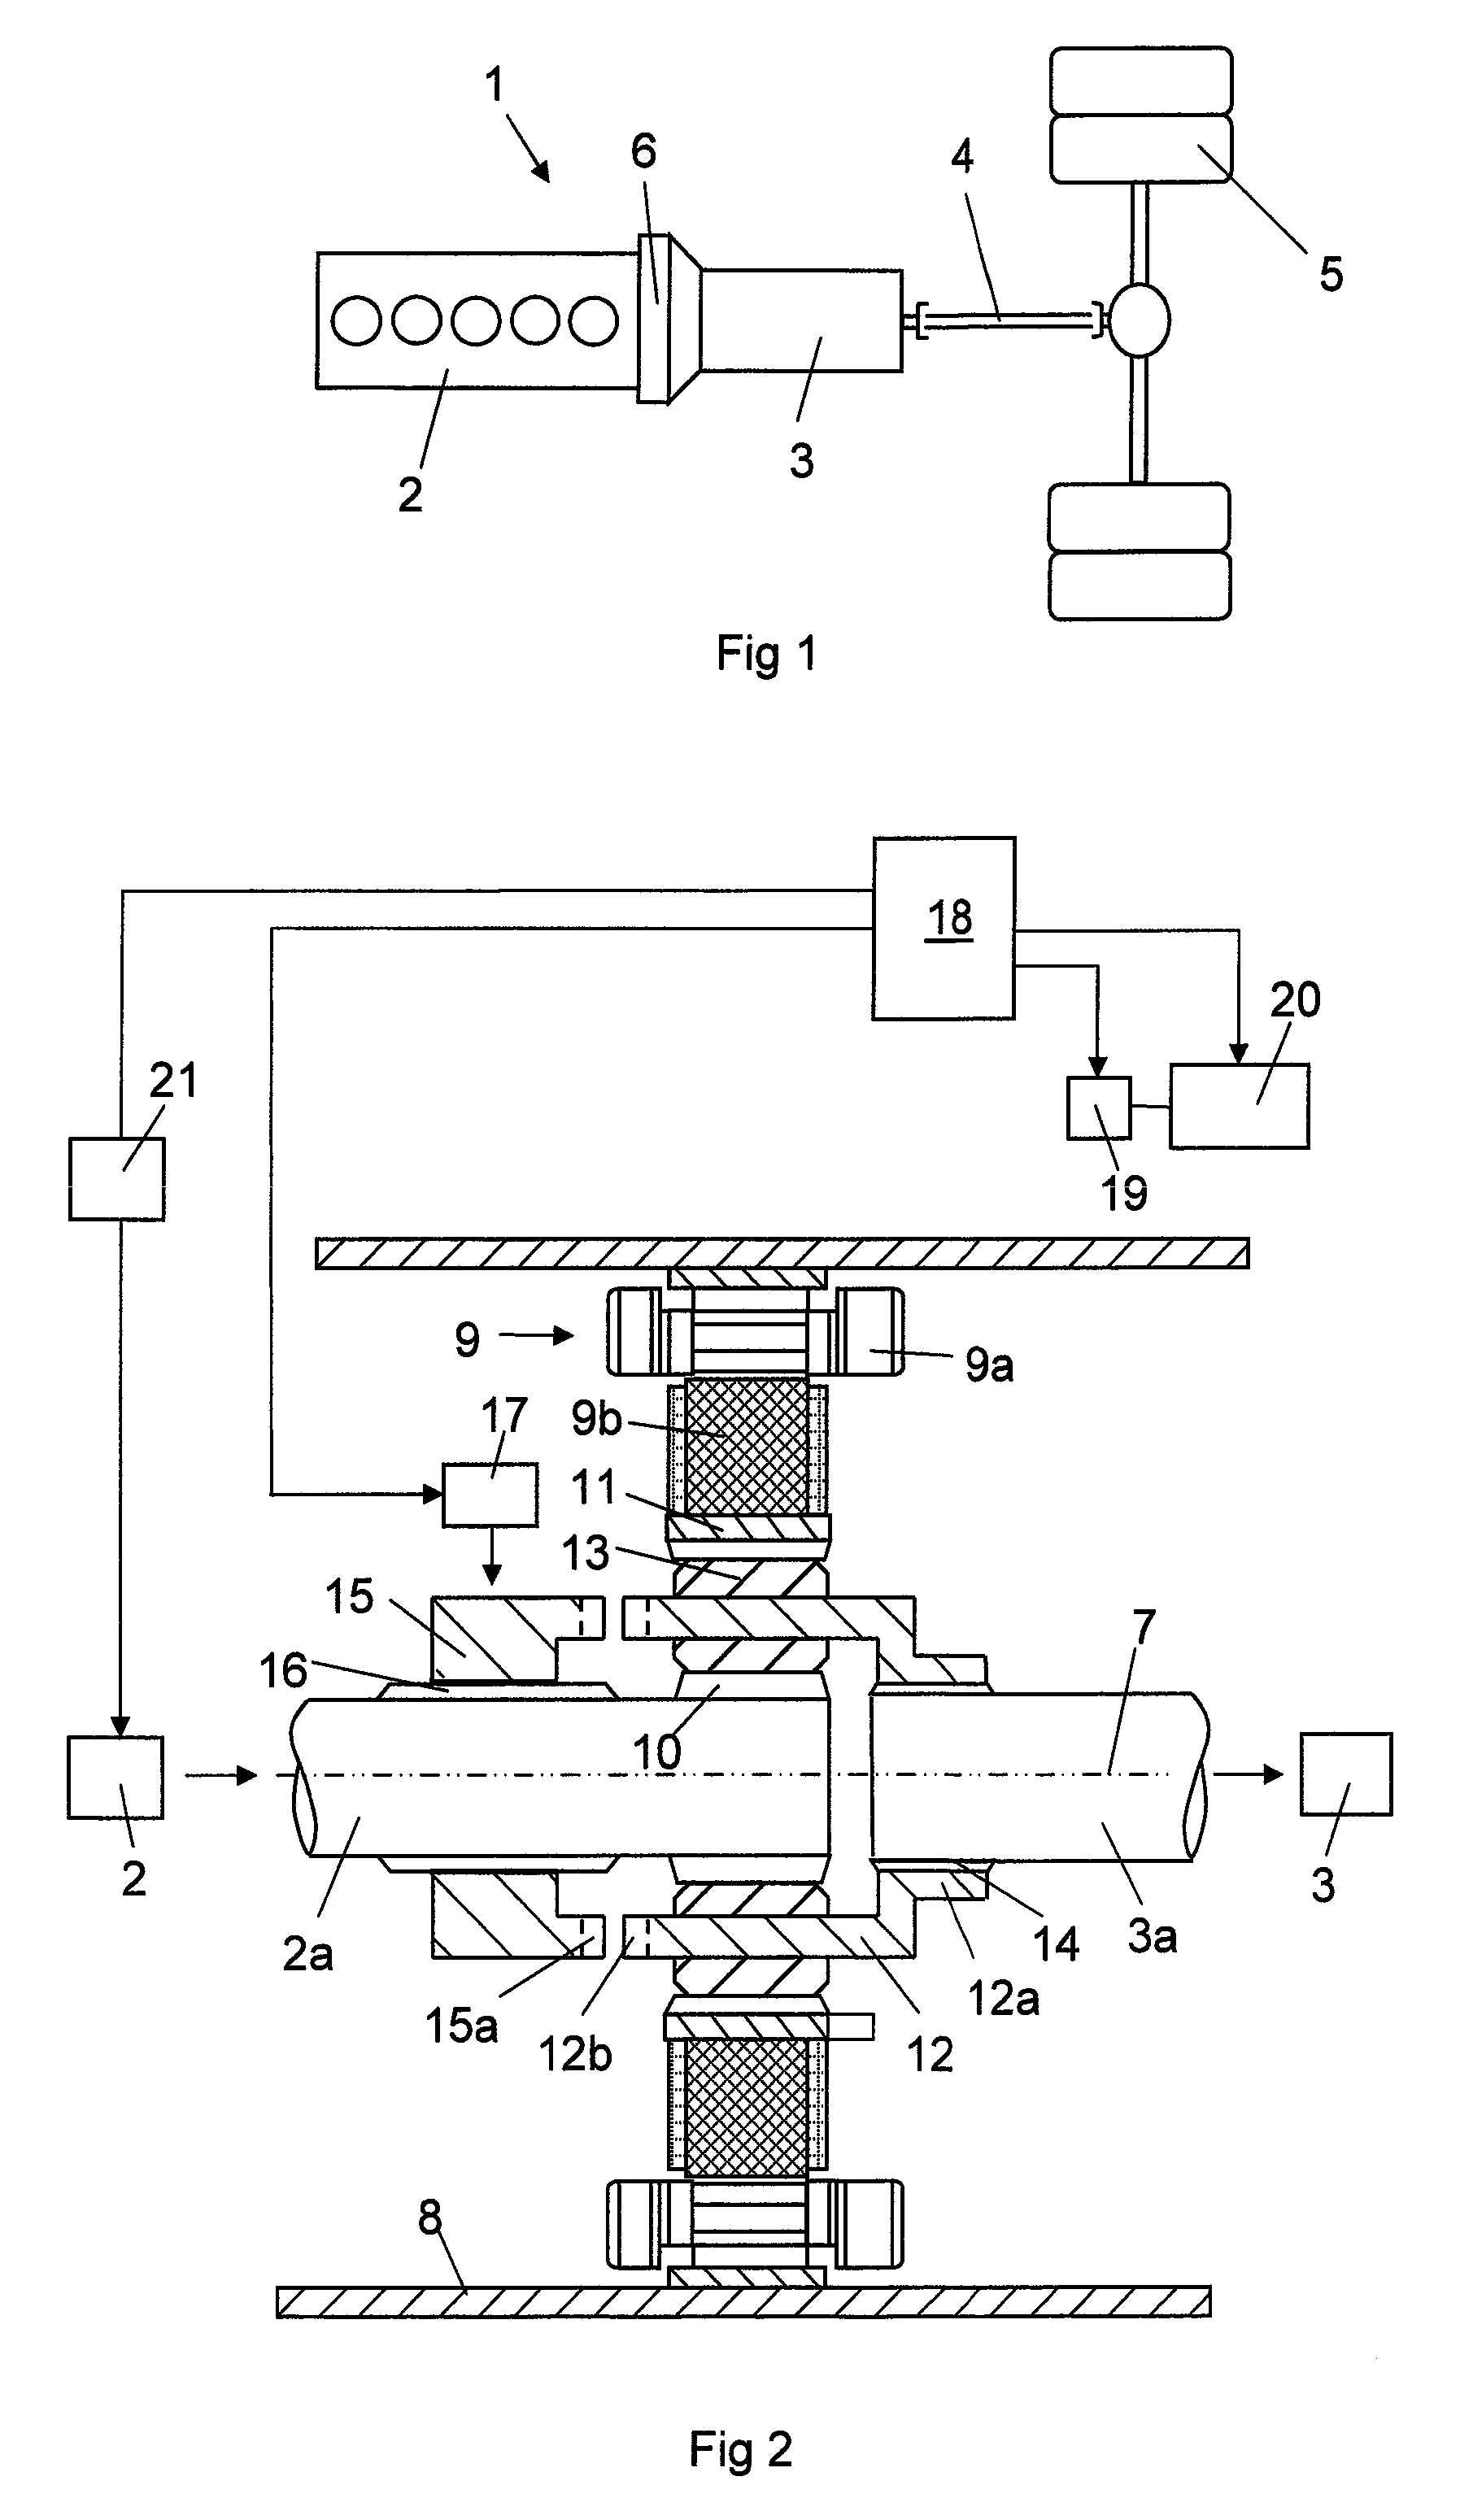 Method for simultaneous control of torque from combustion engine and electric machine in a hybrid vehicle